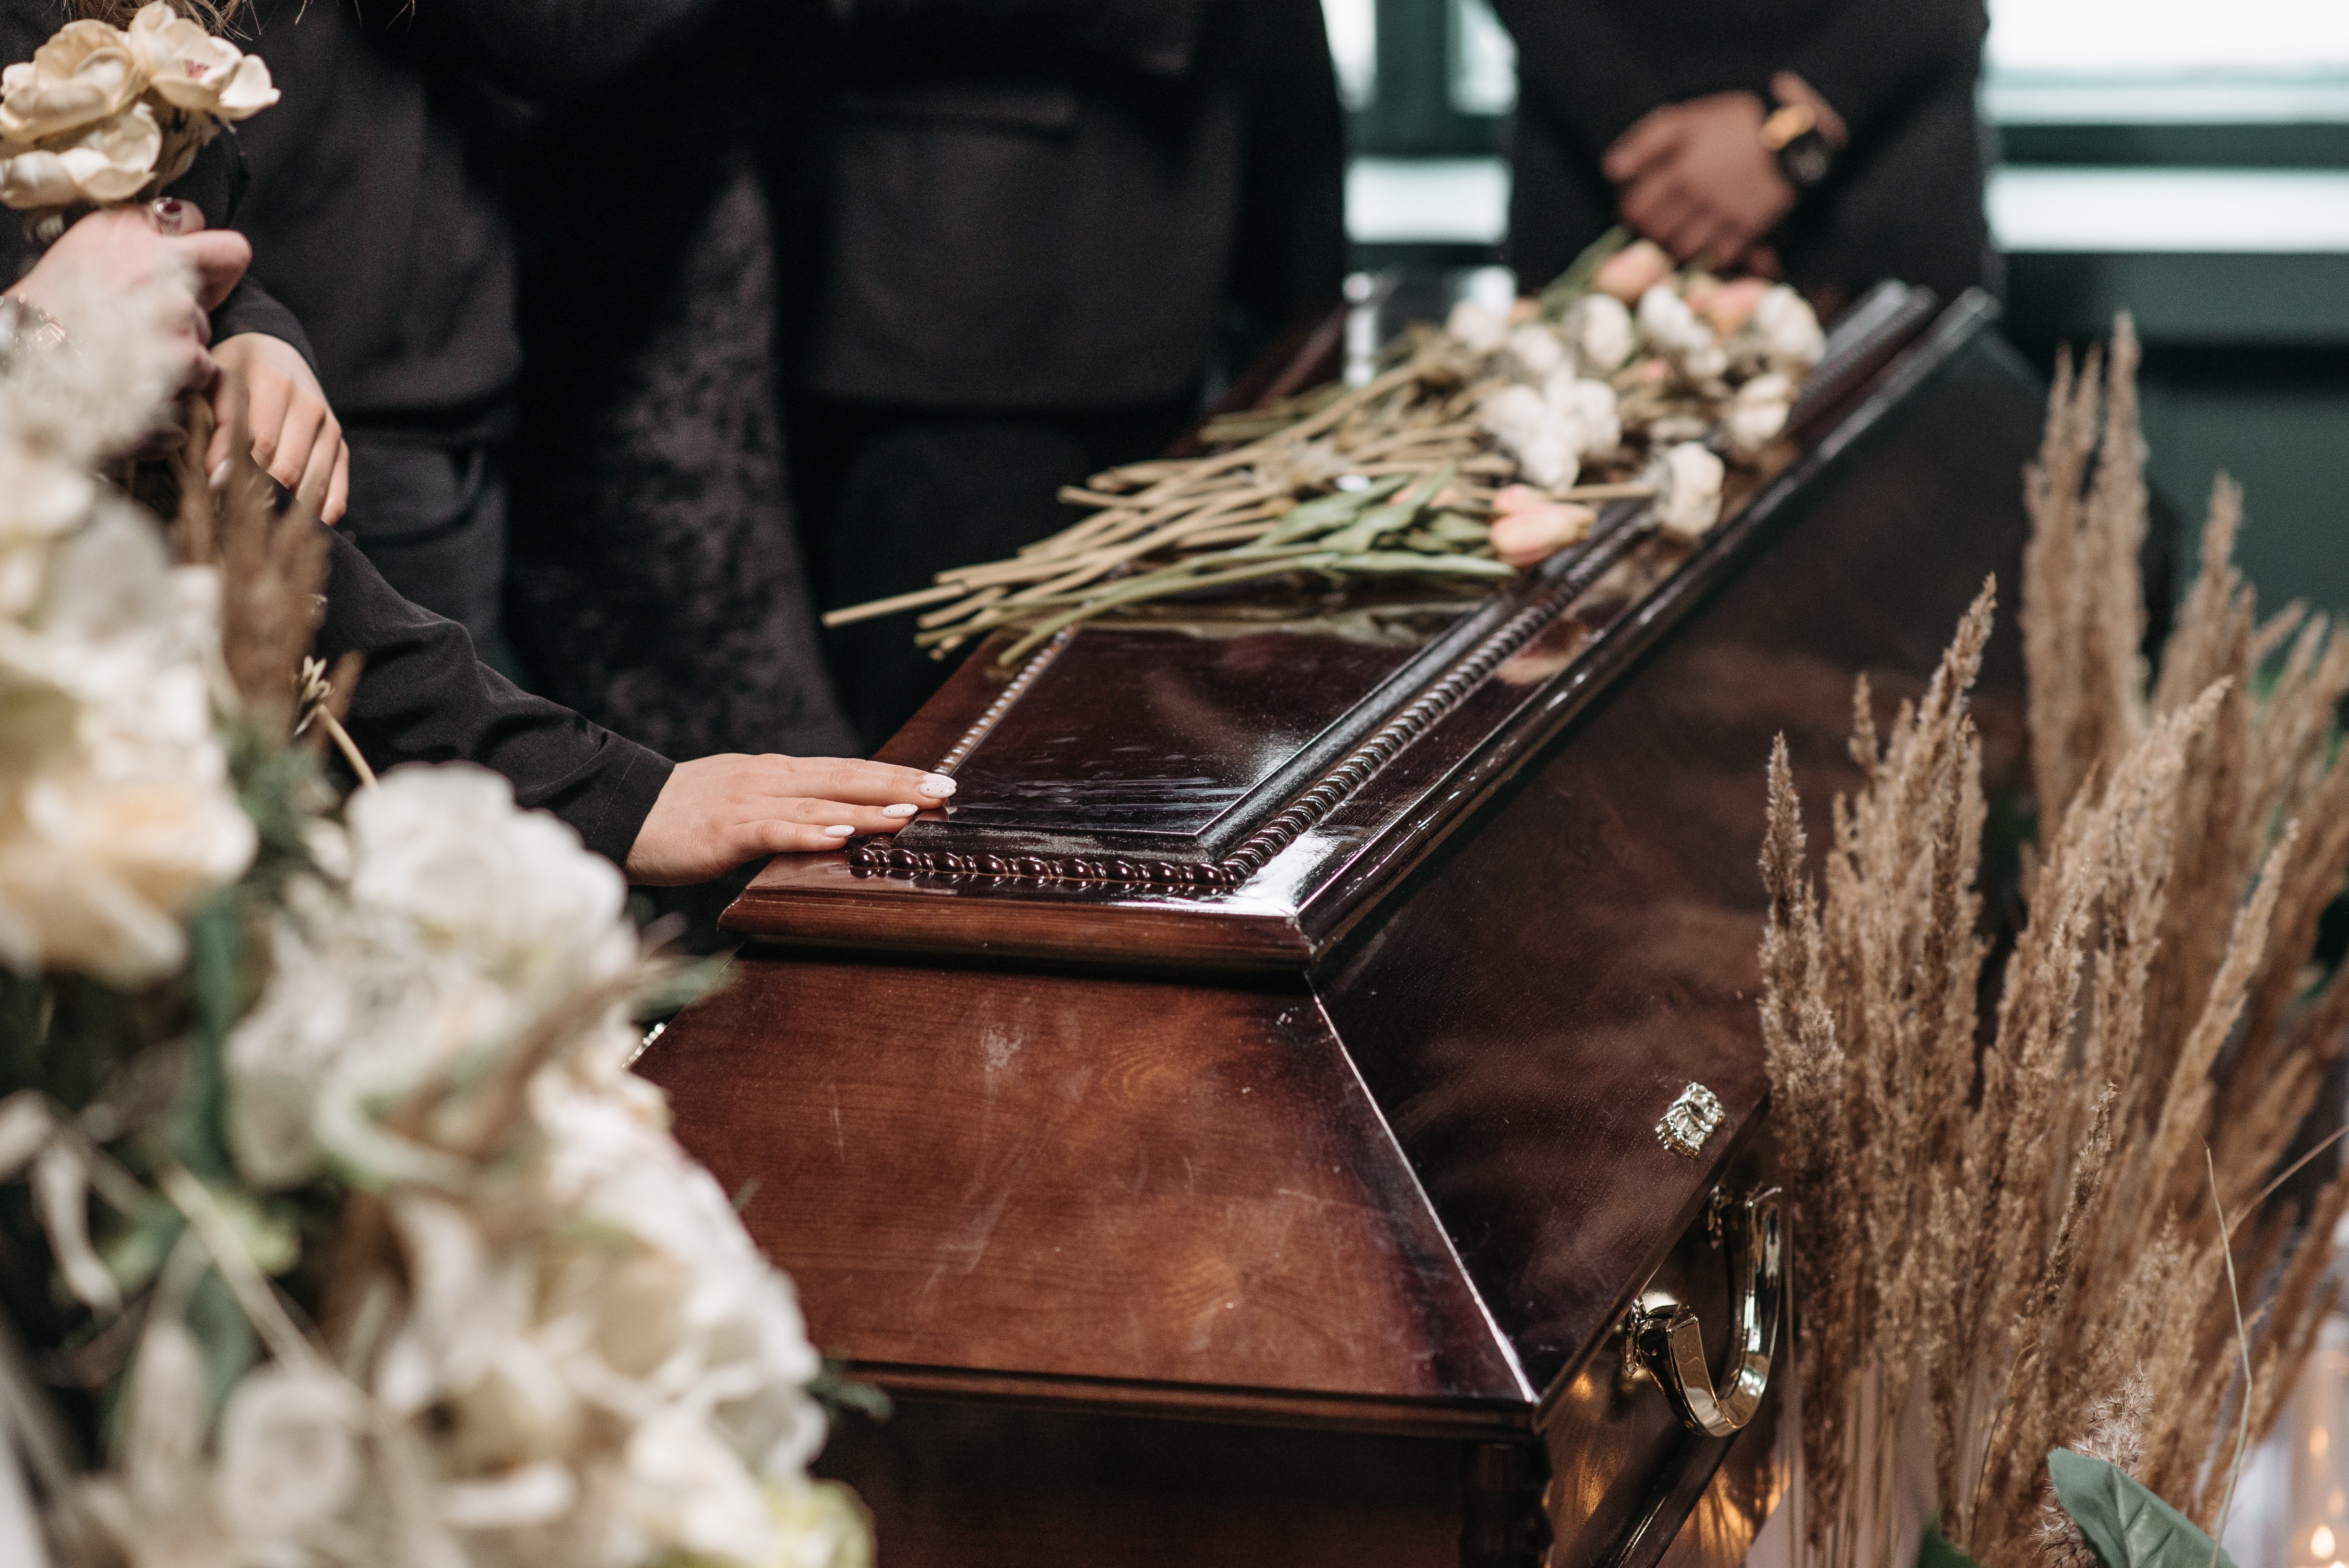 A person holding a wooden coffin | Source: Pexels